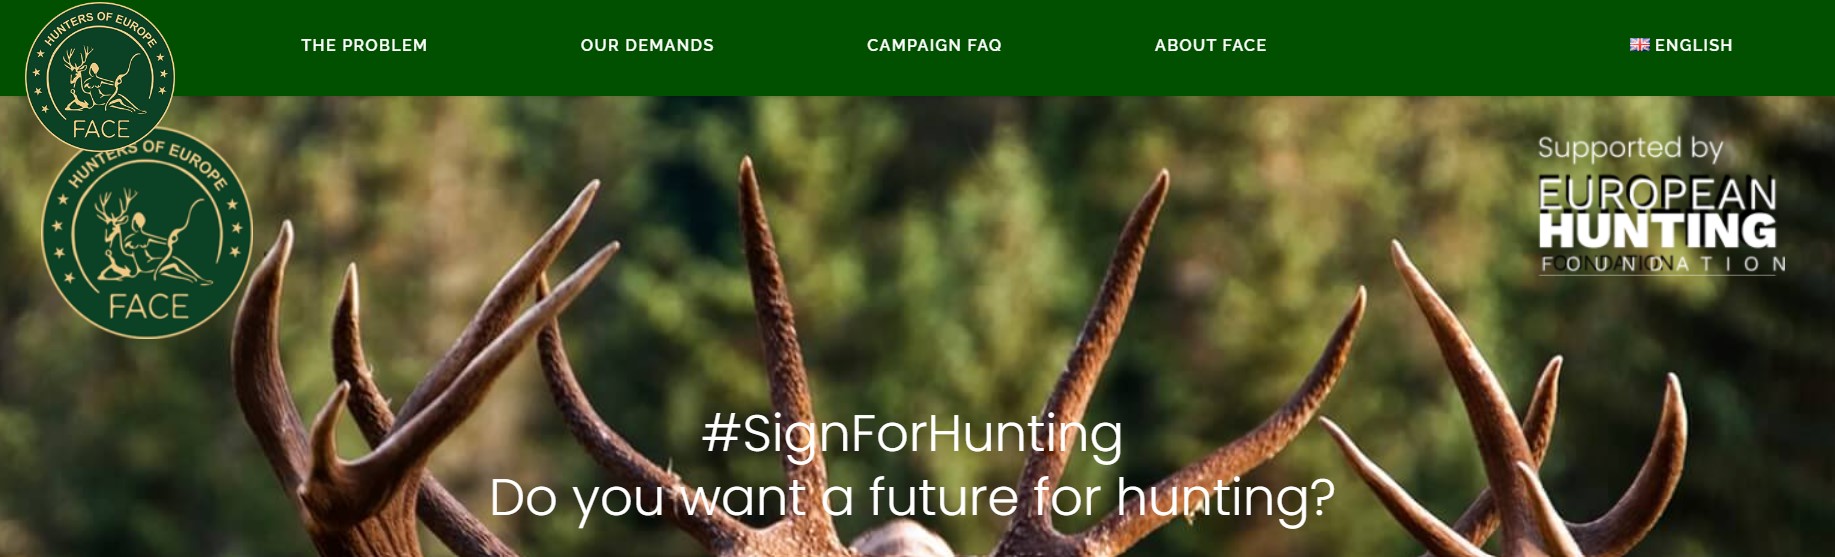 #SignForHunting Do you want a future for hunting?